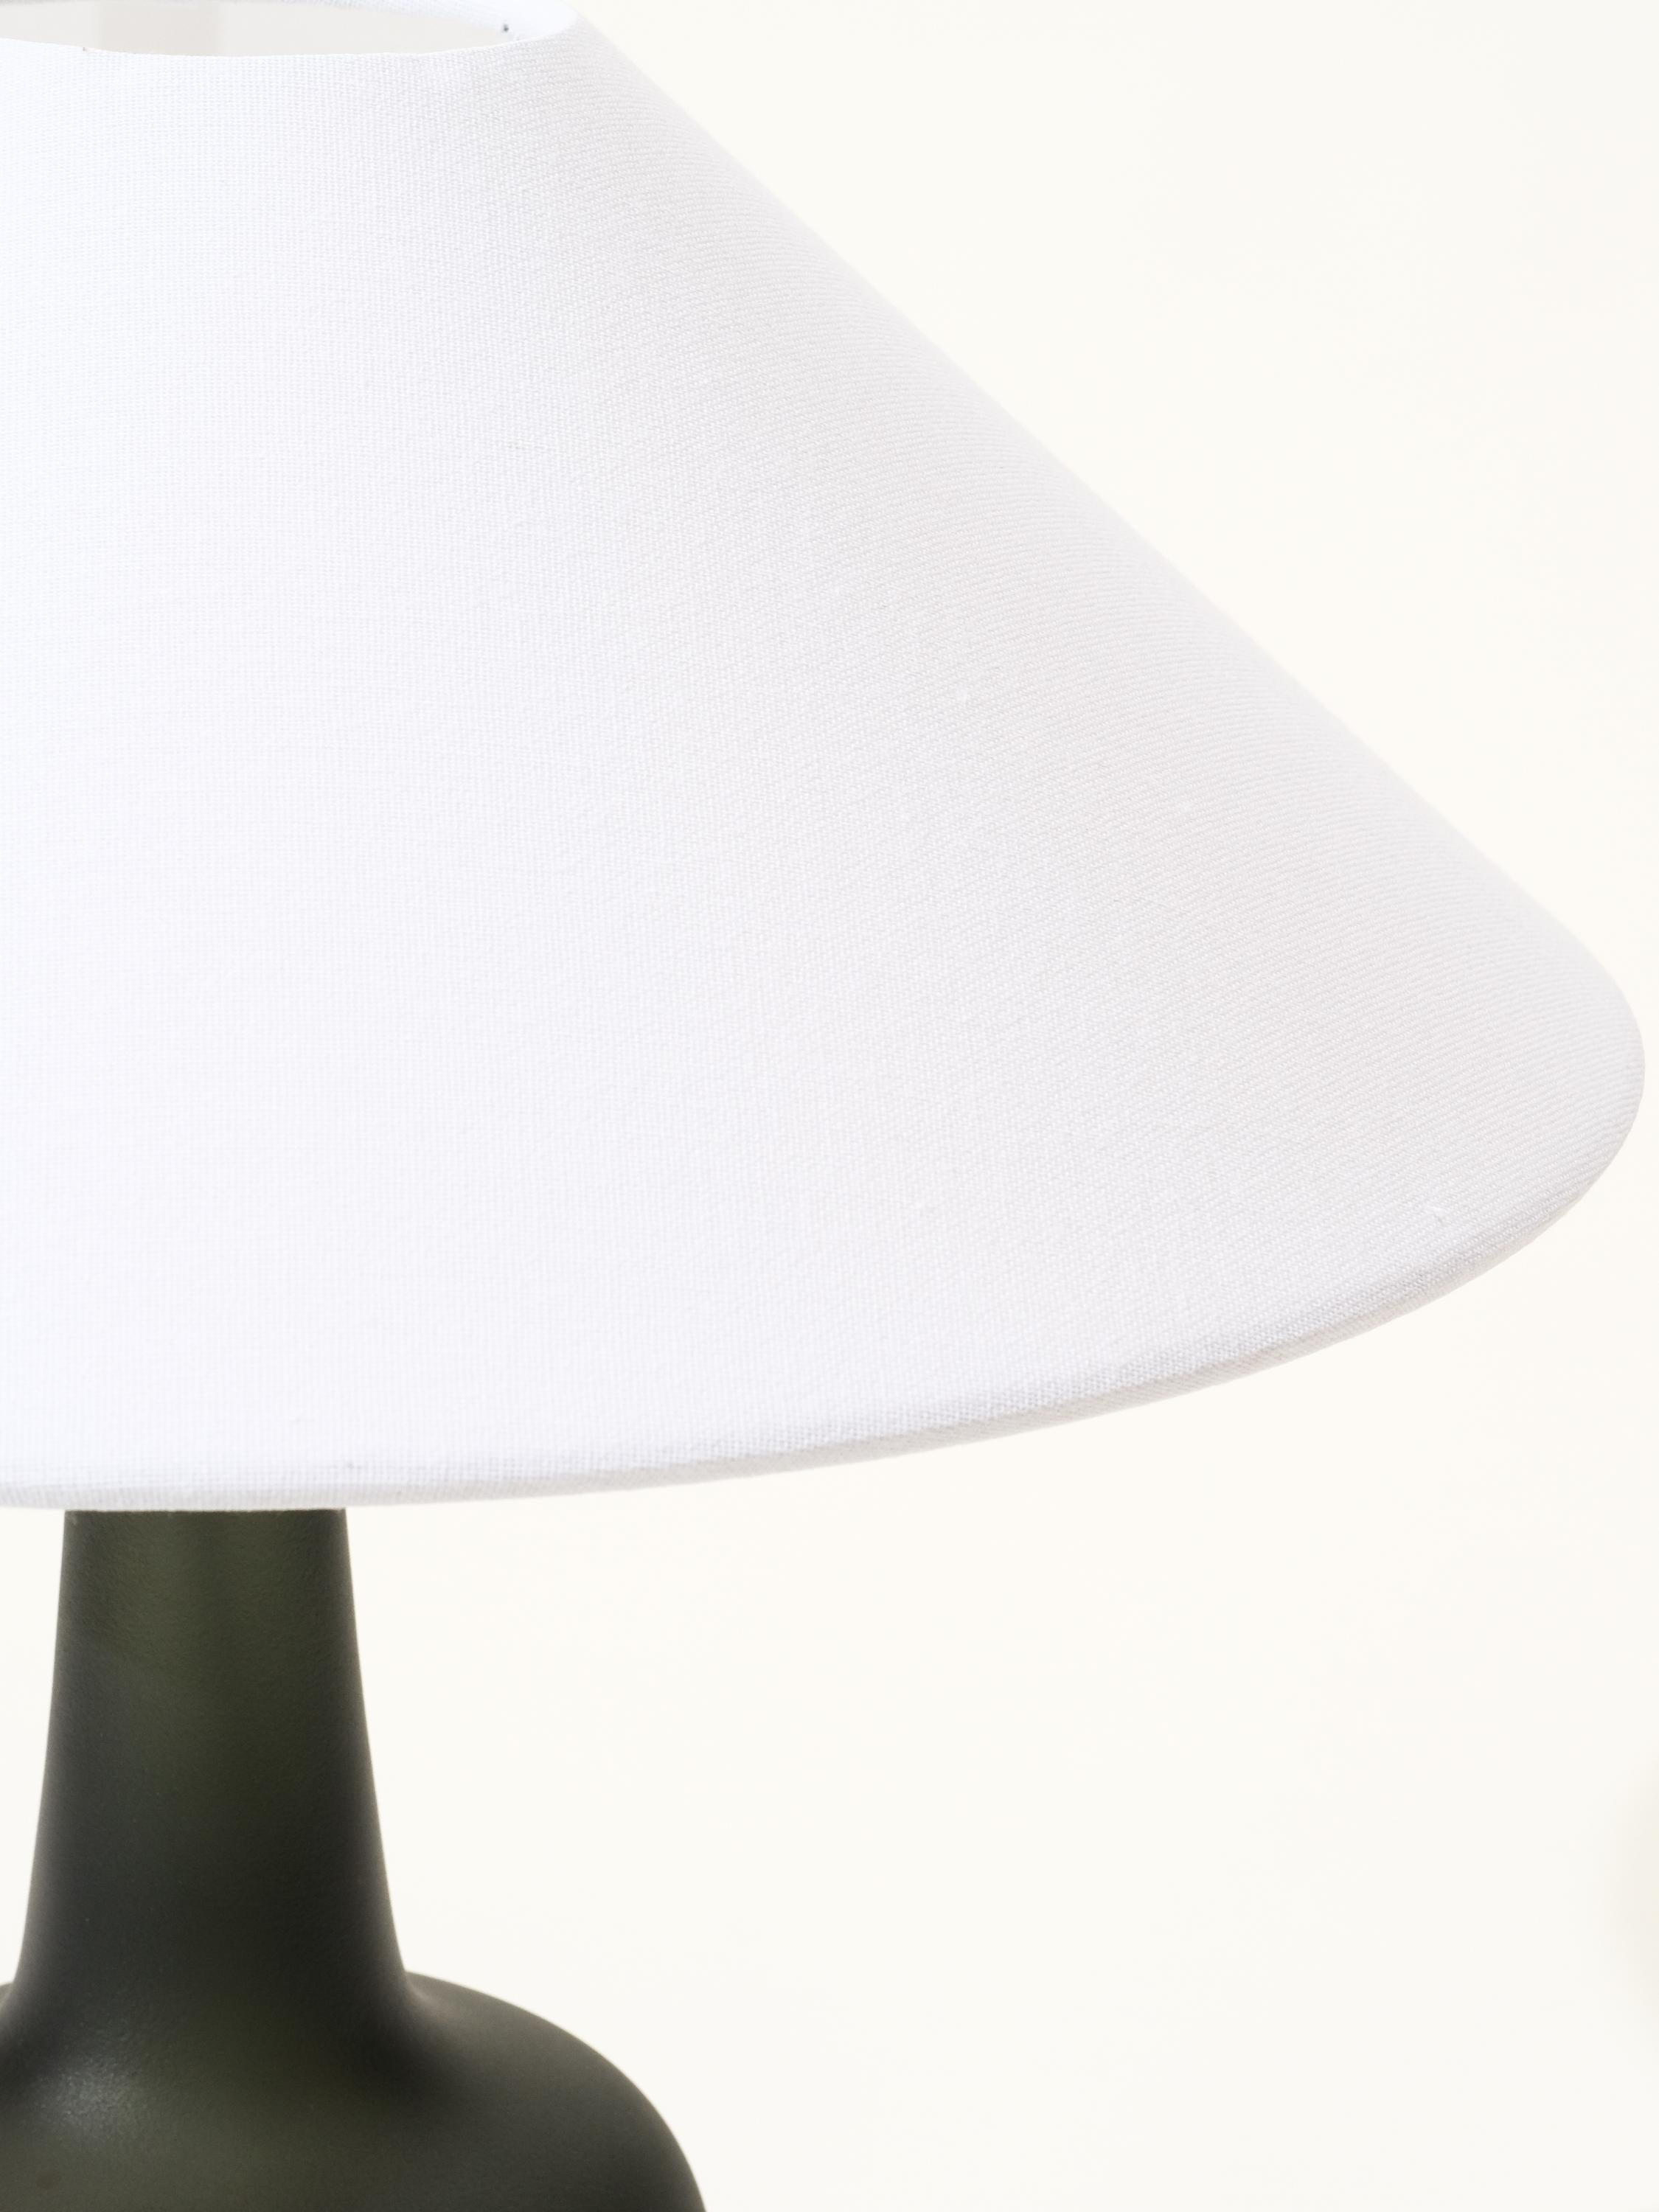 Glass Table Lamp by Ove Sandeberg for Kosta Boda, 1960s For Sale 2